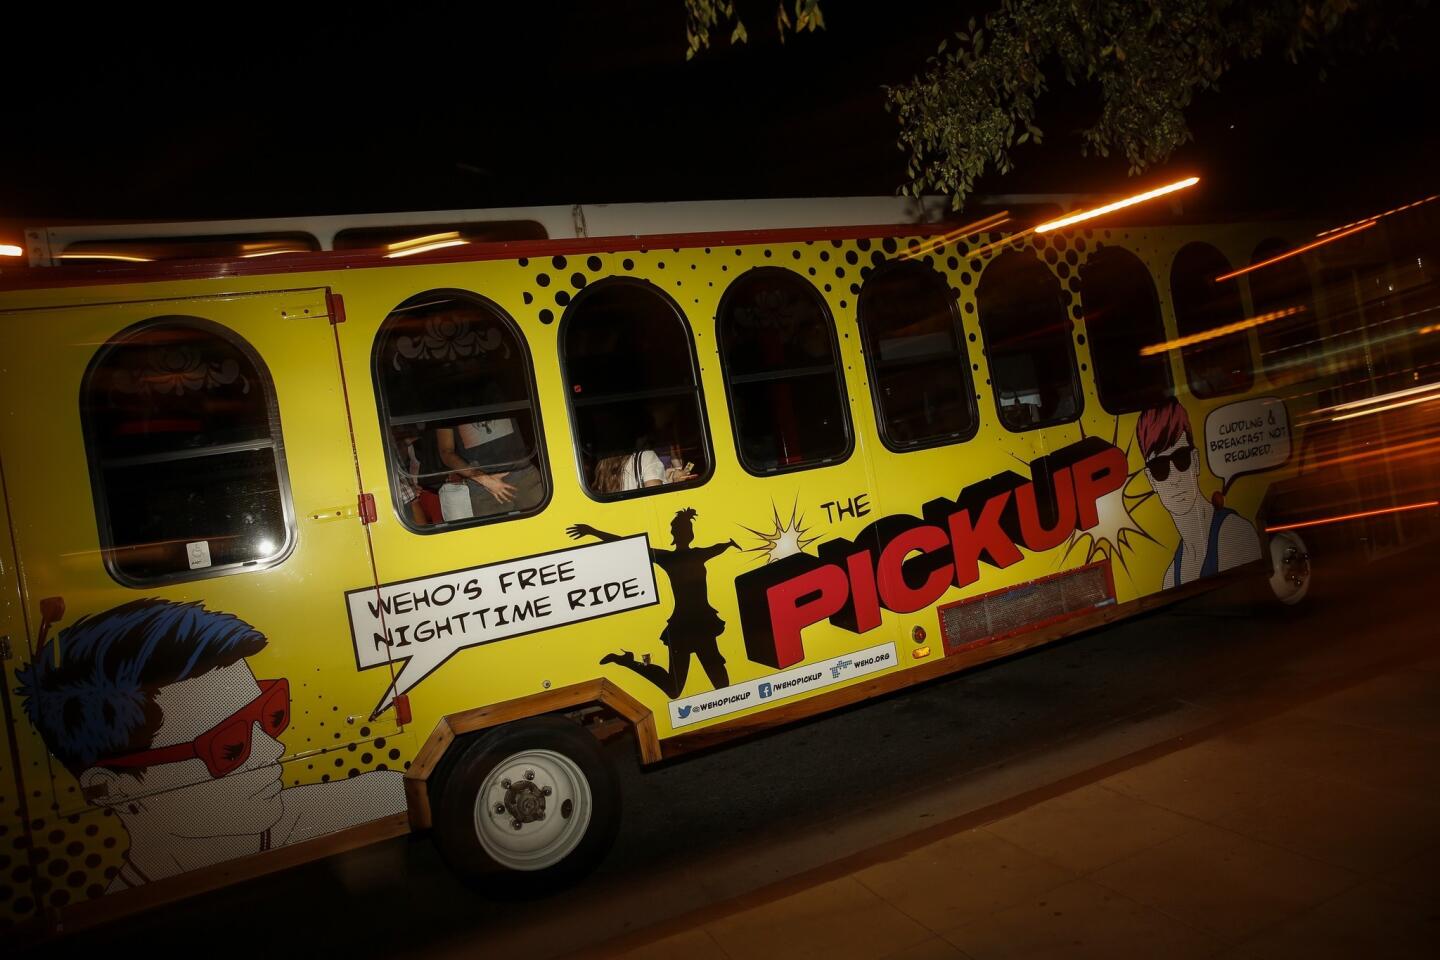 One of the two PickUp line trolleys drives on Santa Monica Boulevard between Robertson Boulevard and Fairfax Avenue. West Hollywood hopes it will spice up the nightlife and prevent drunk driving.